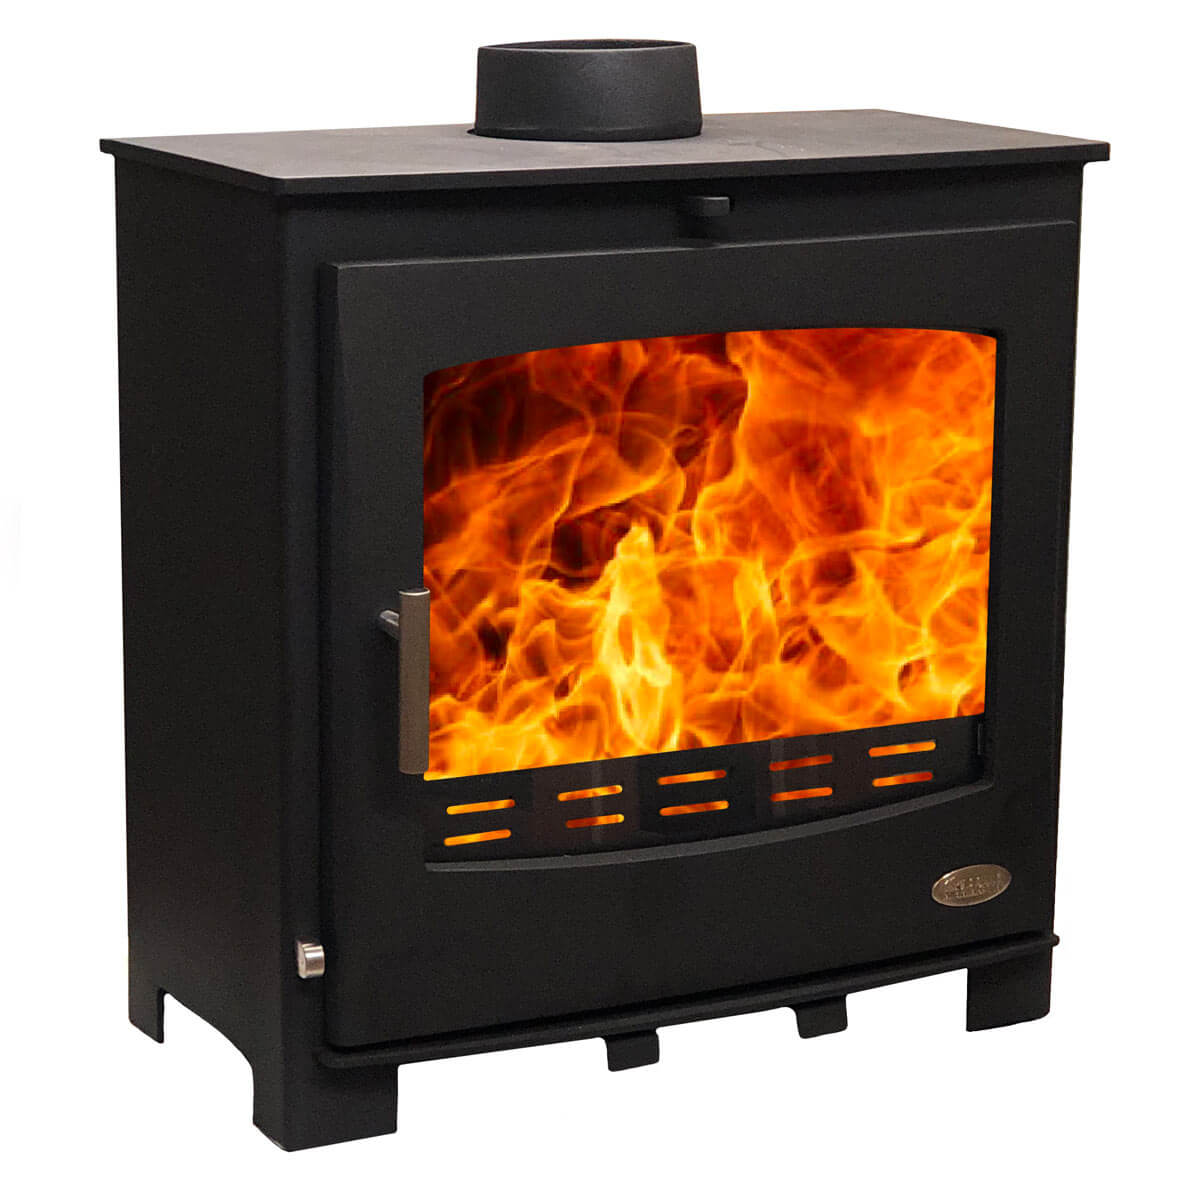 Woolly Mammoth 8 mk2 Multifuel Stove - Glowing Flame